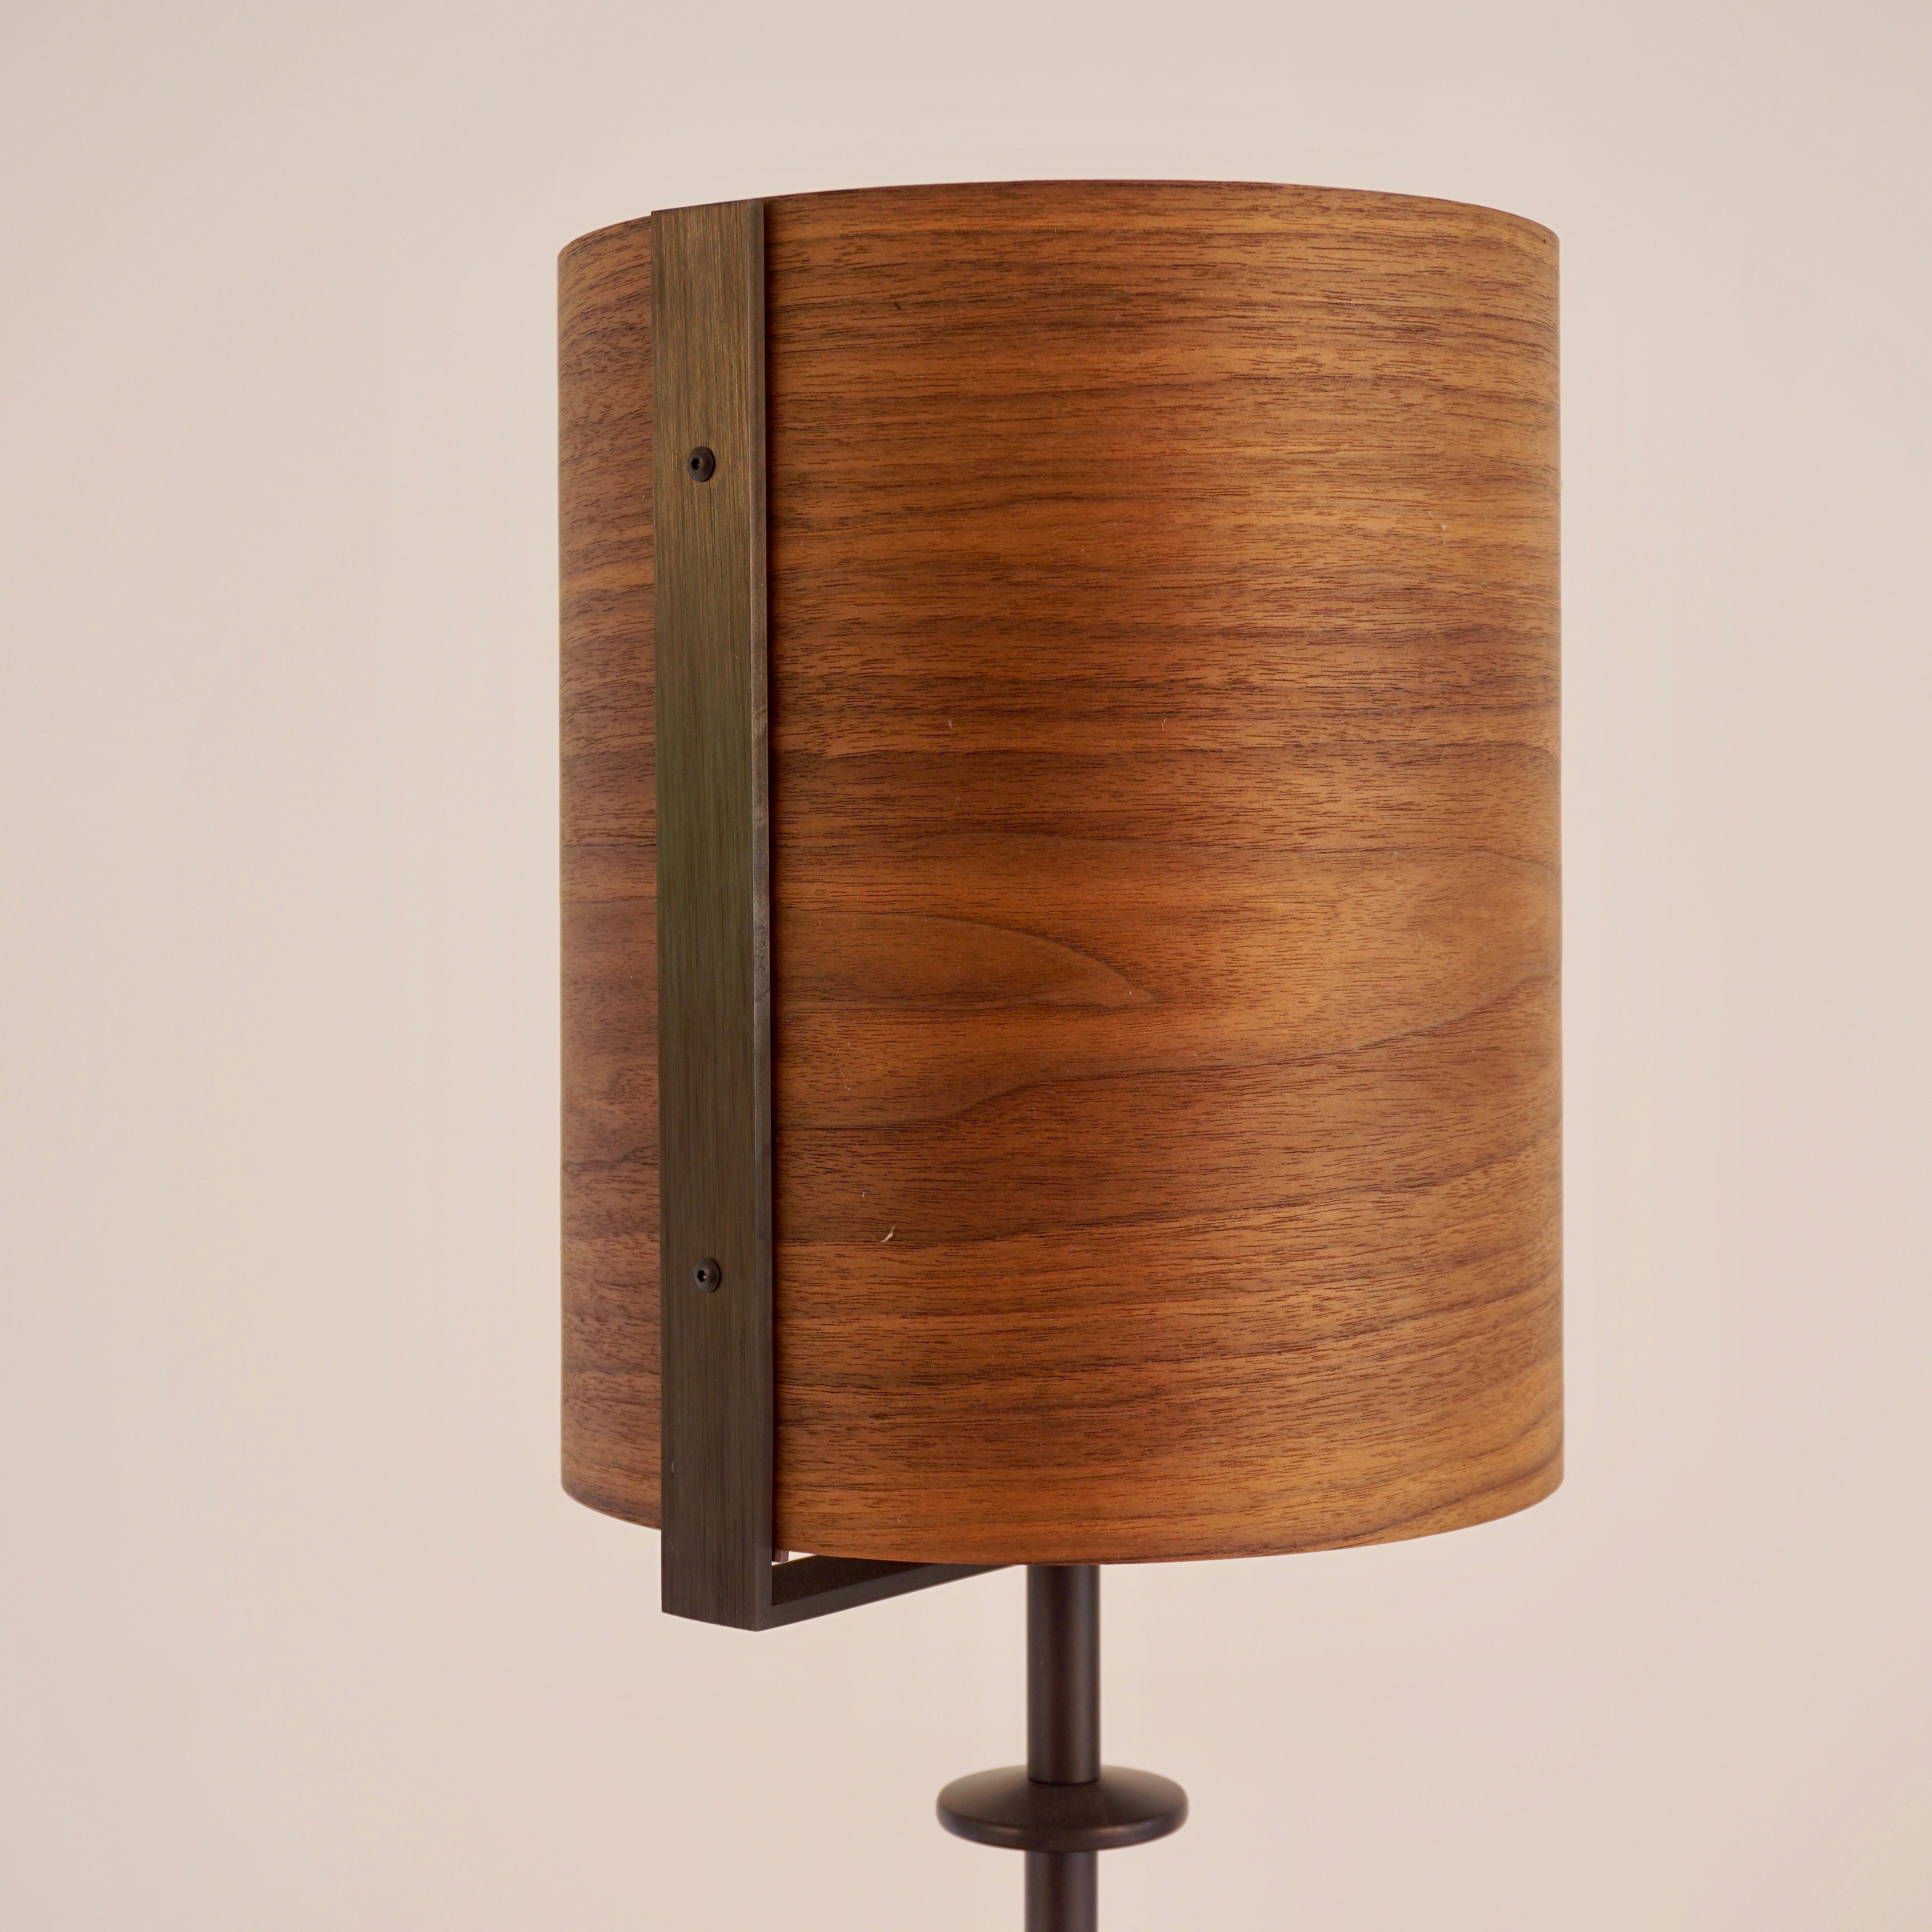 The walnut veneer lamp #4 is part of the original Lehrecke Veneer Lighting Collection from 1998. The idea began with the beautiful way light came through thin wood veneers, many being local woods. The walnut has a beautiful dark brown color typical